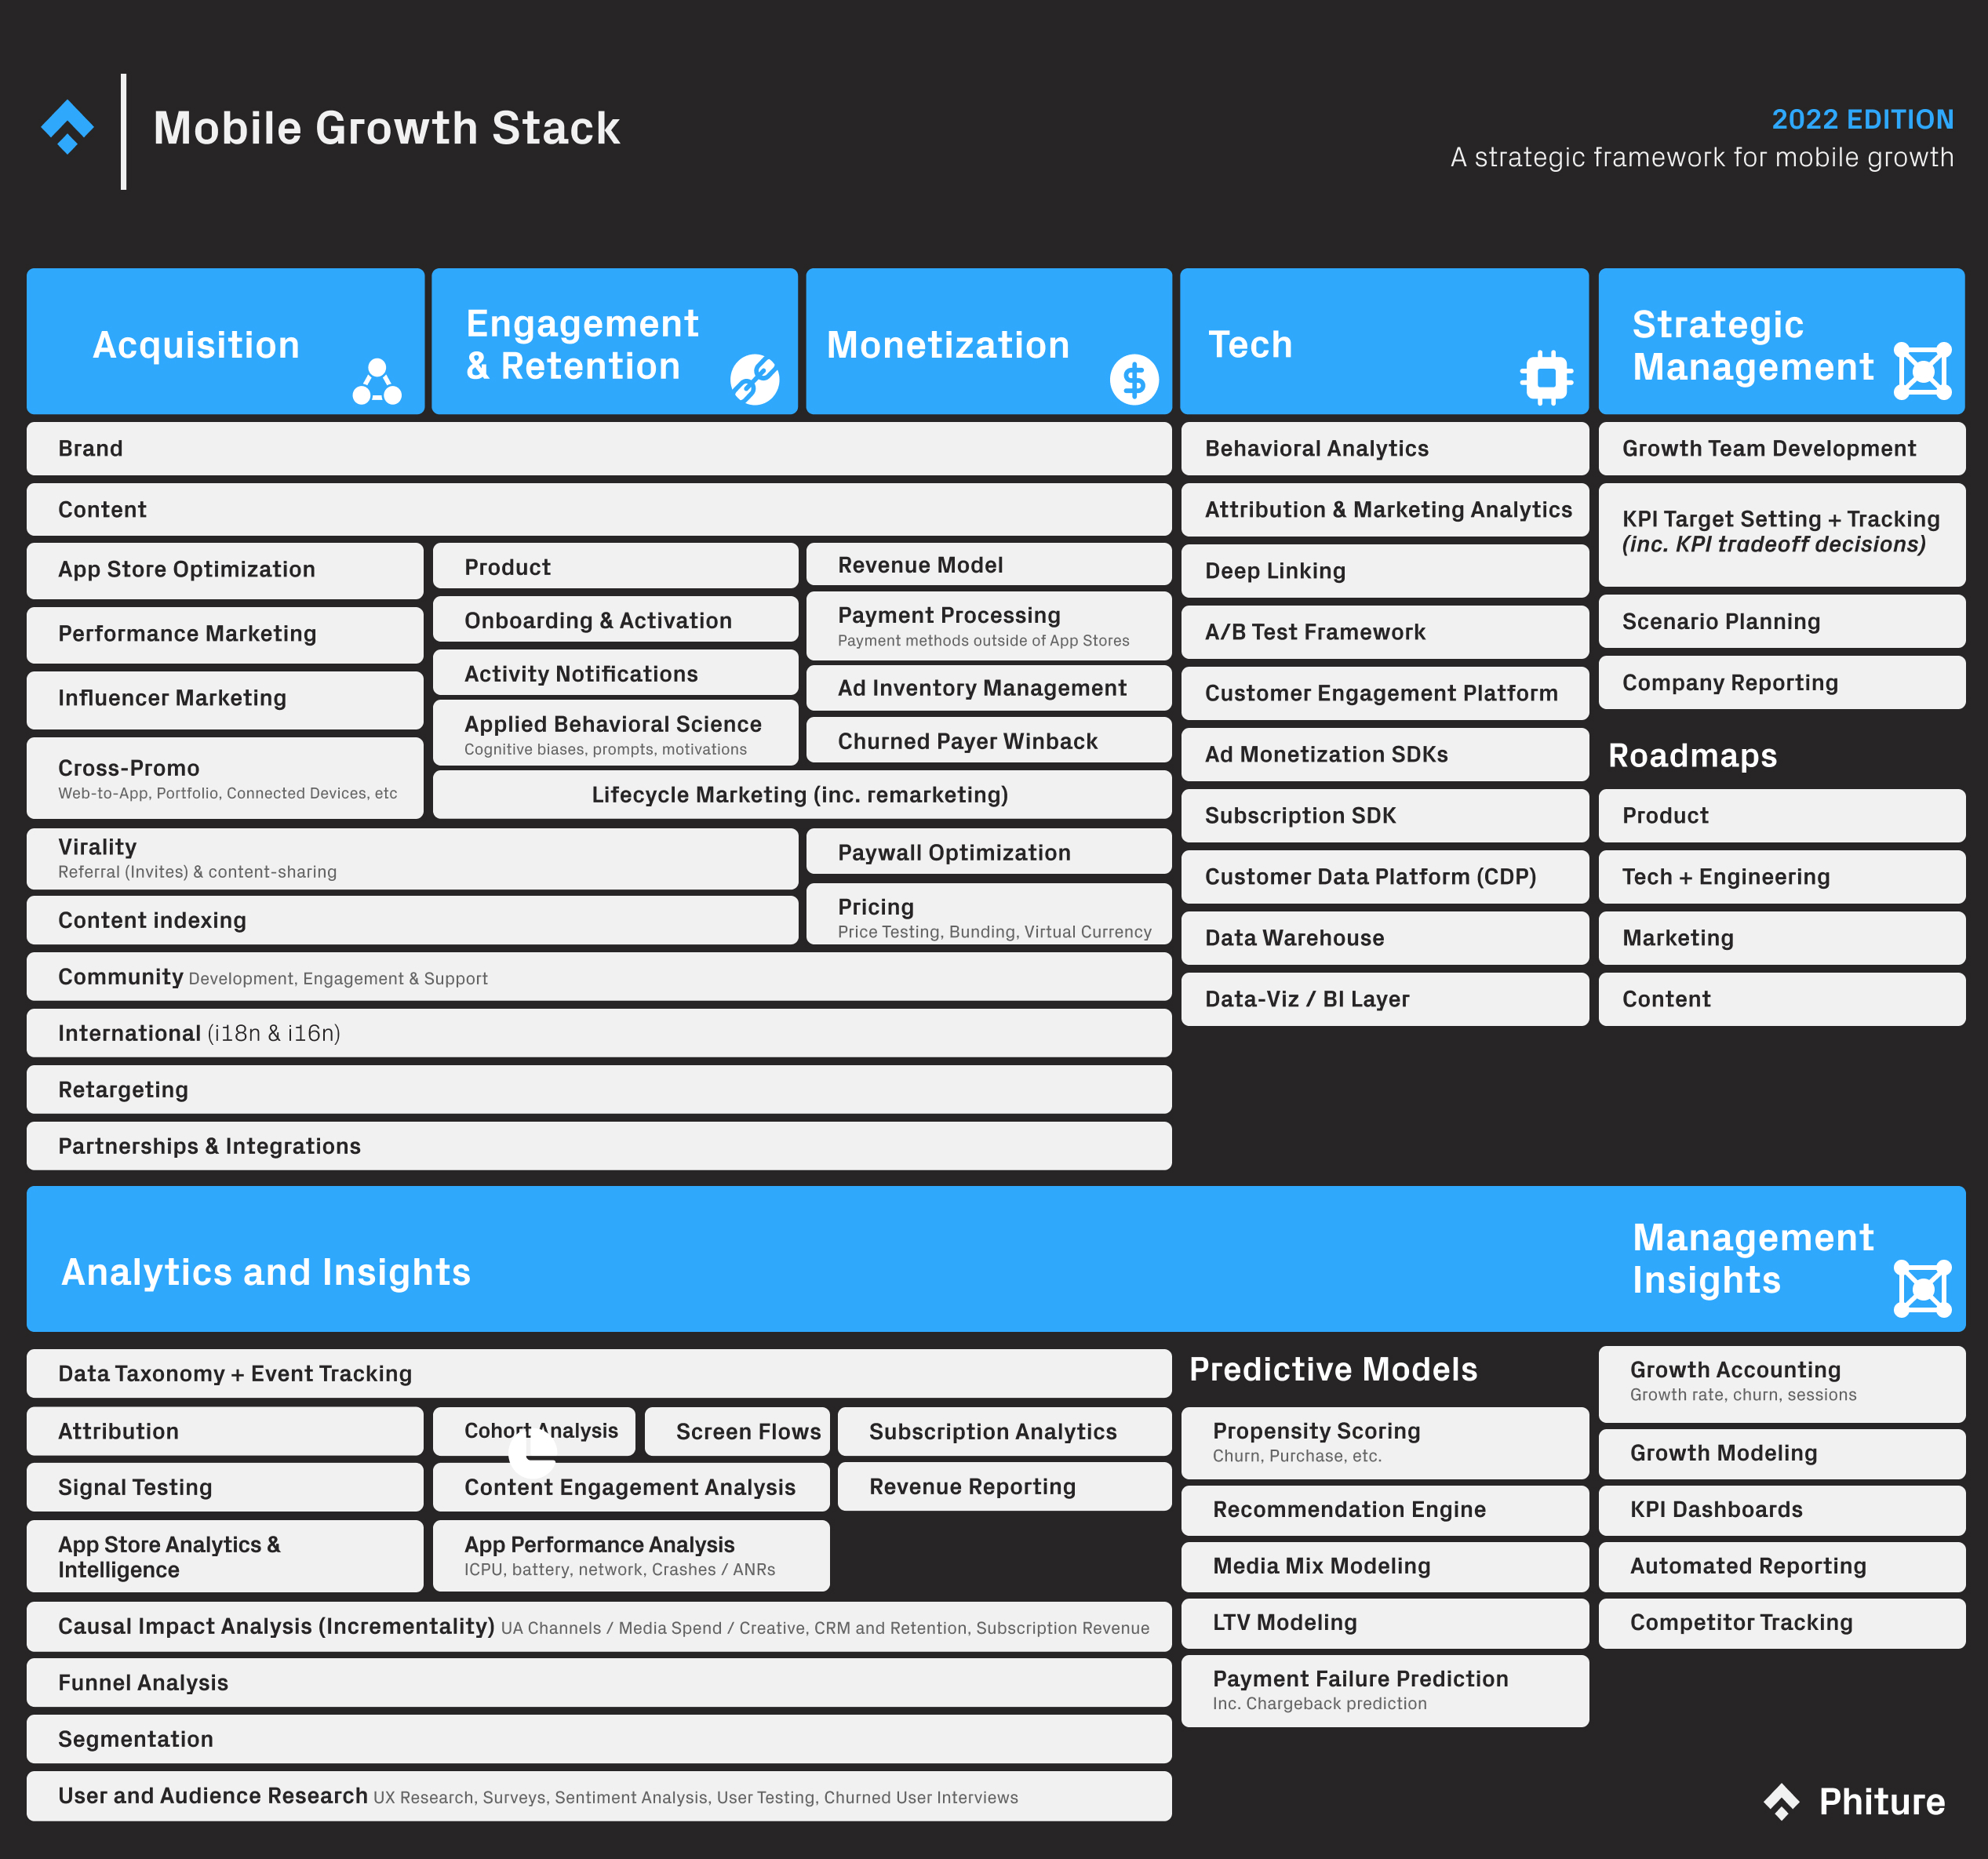 The Mobile Growth Stack: 2022 Redux